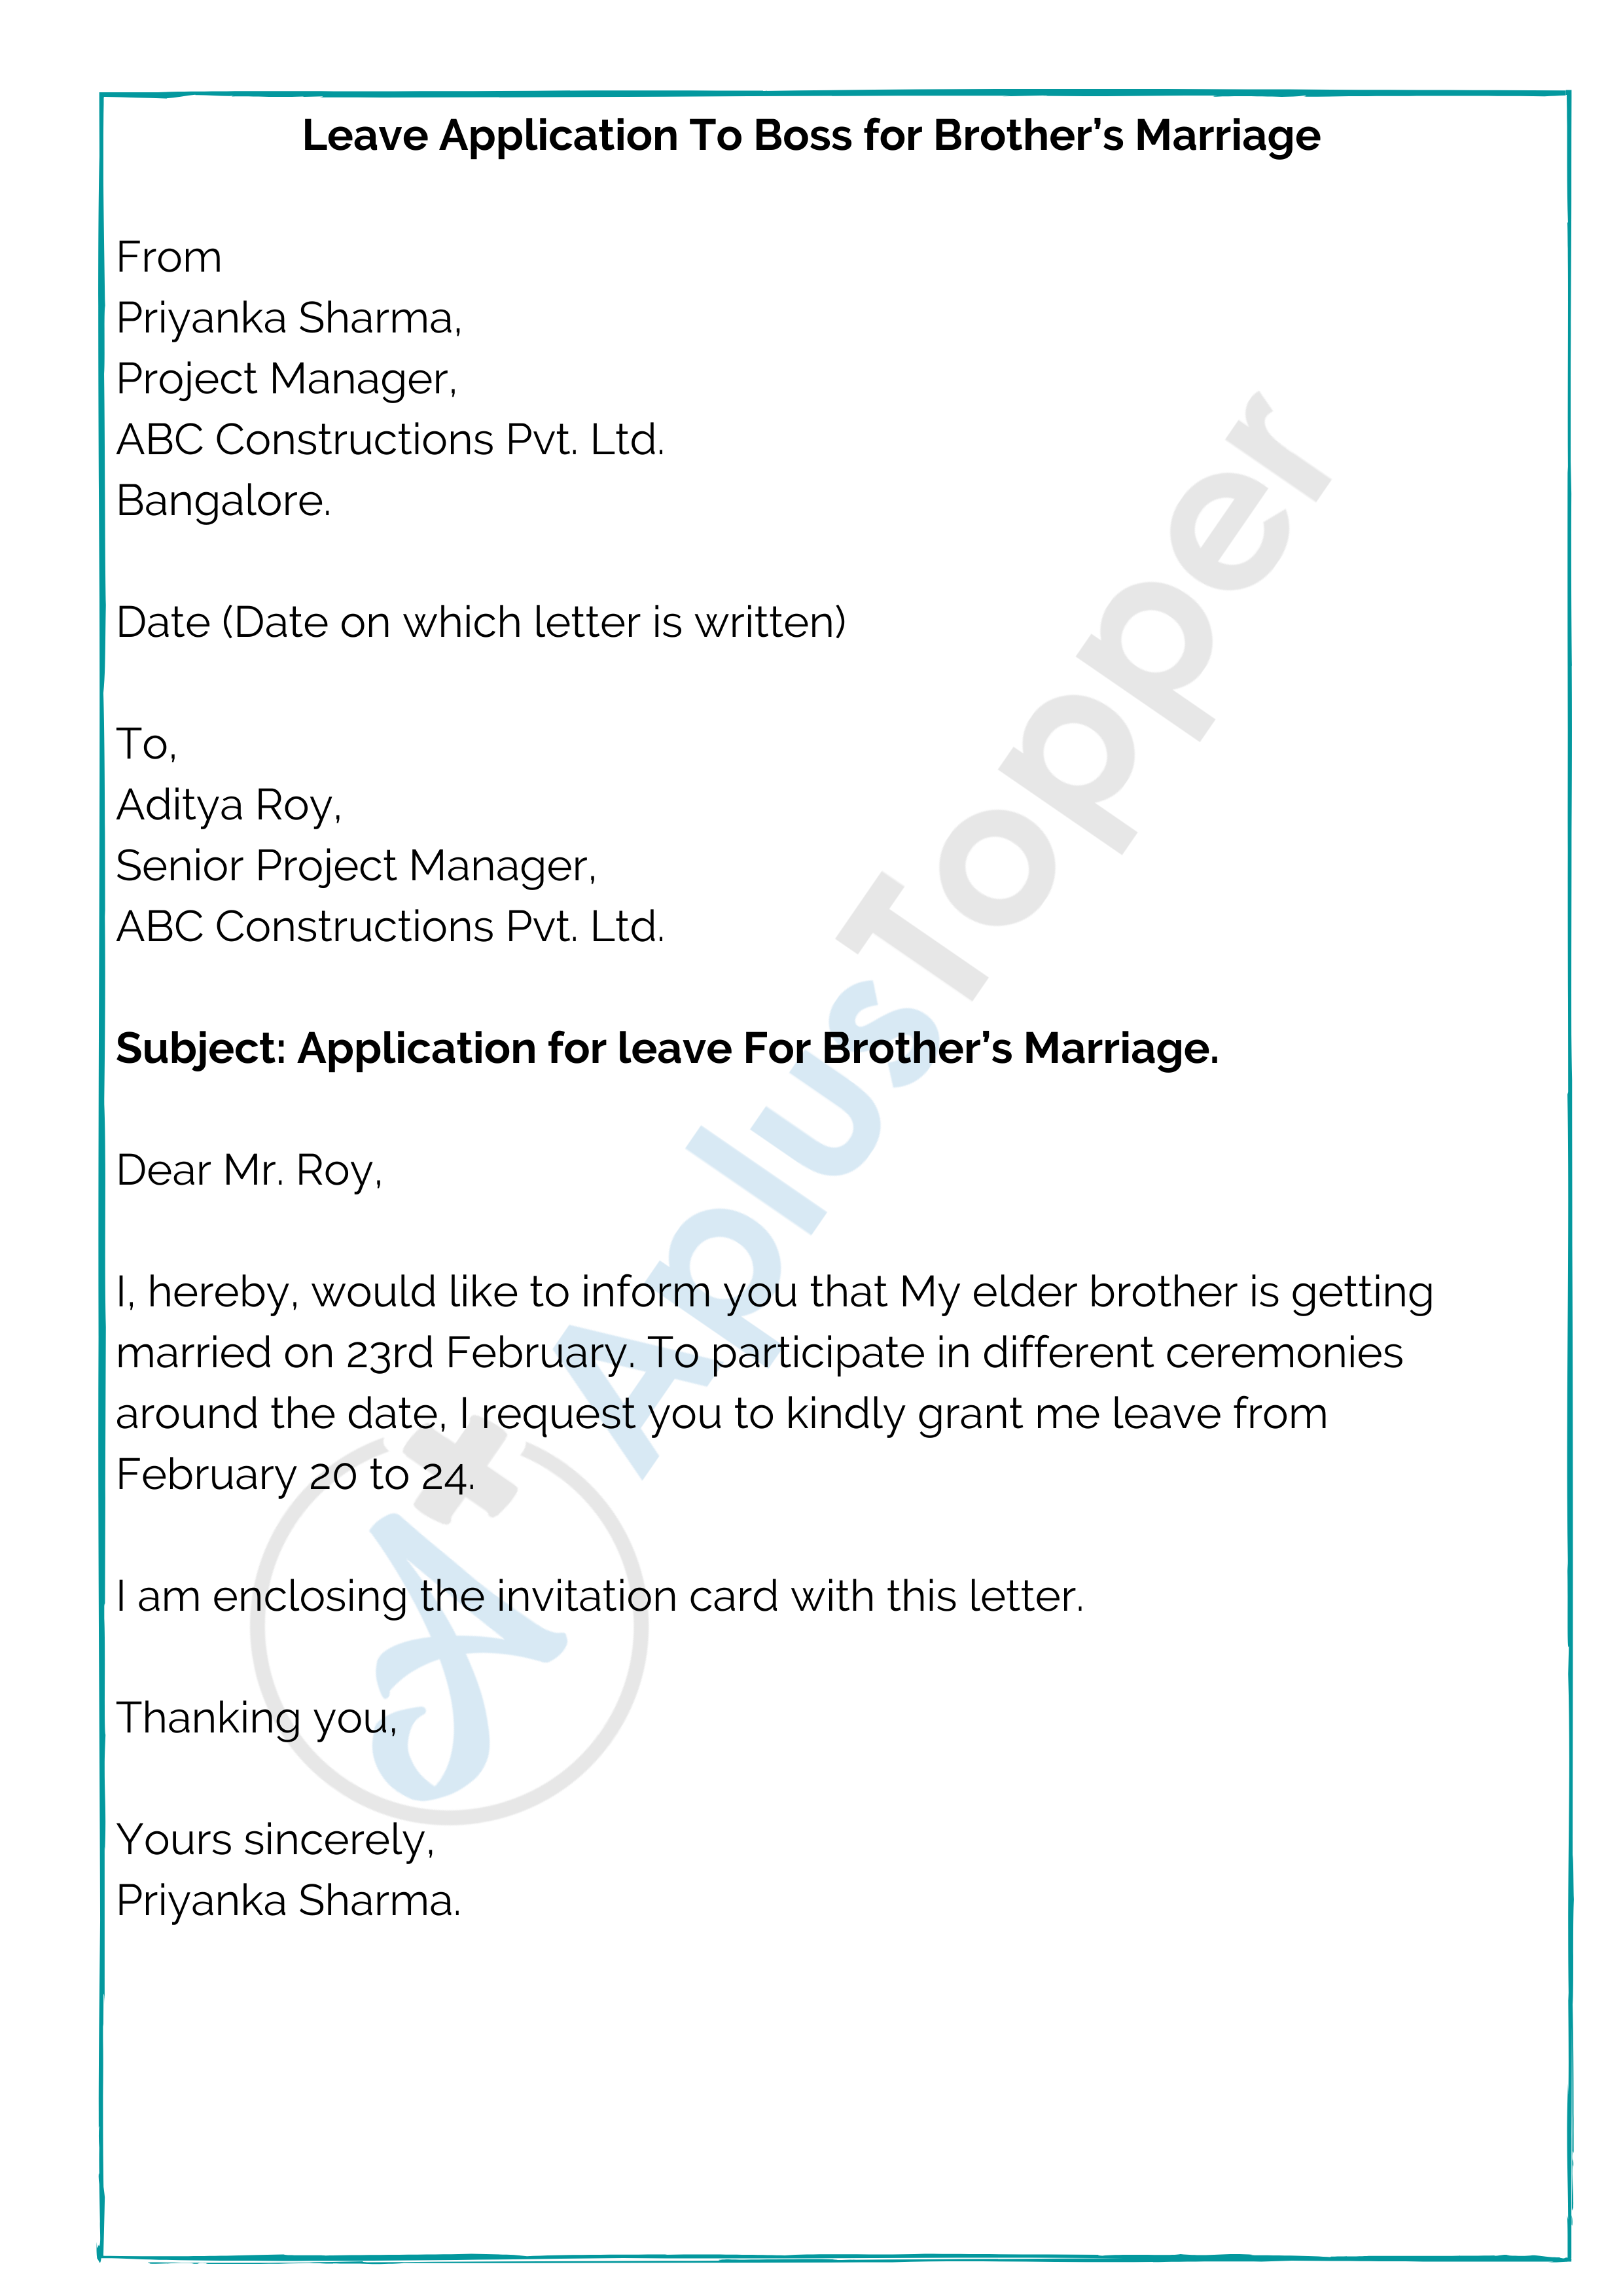 Leave Application To Boss  How To Write A Leave Application